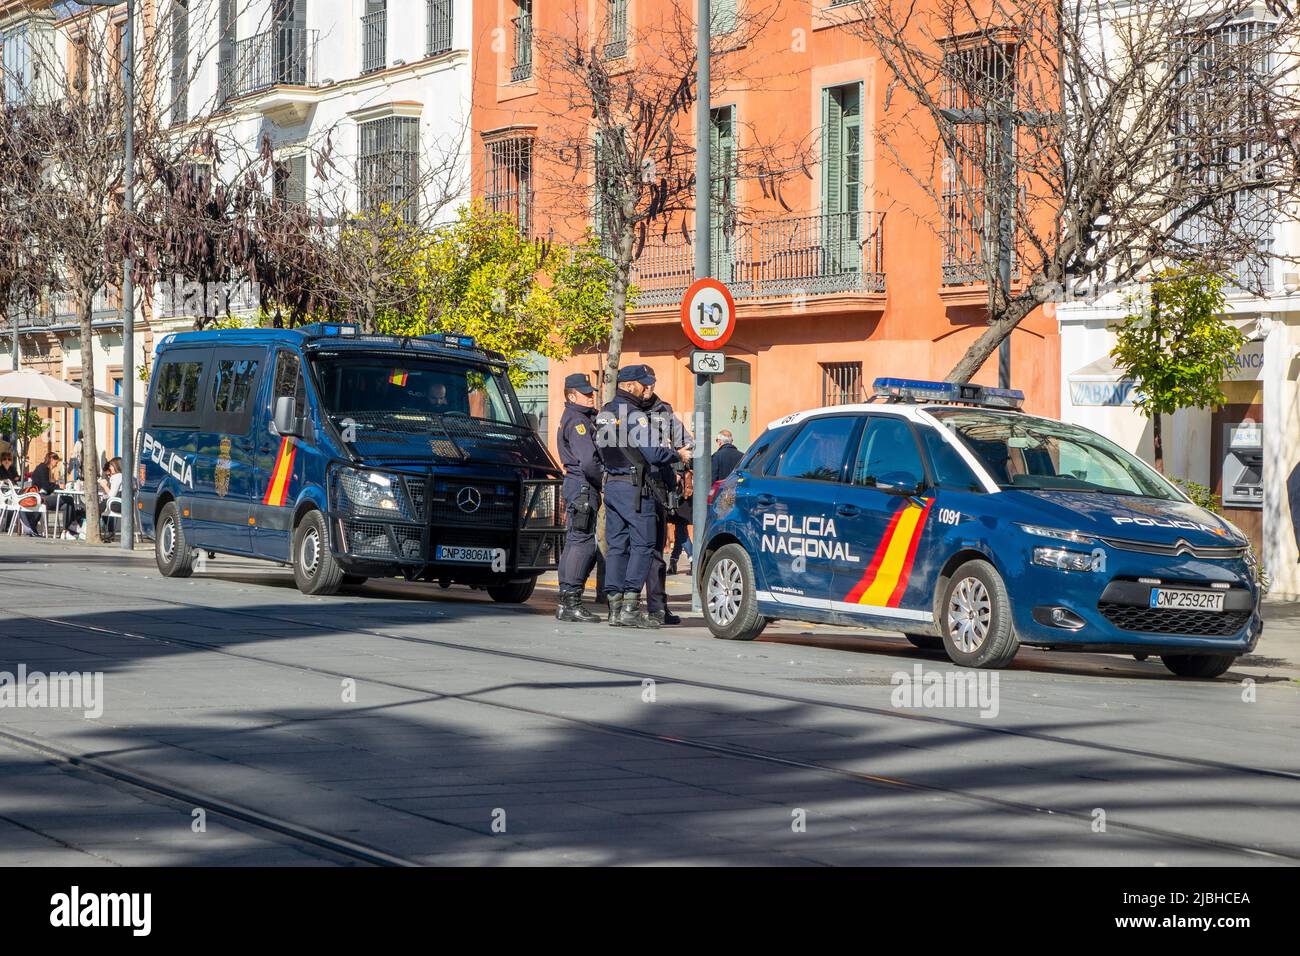 Spanish National Police Officers And Police Car And Police Van In Seville City Centre Spain, Policia Nacional Spain Stock Photo